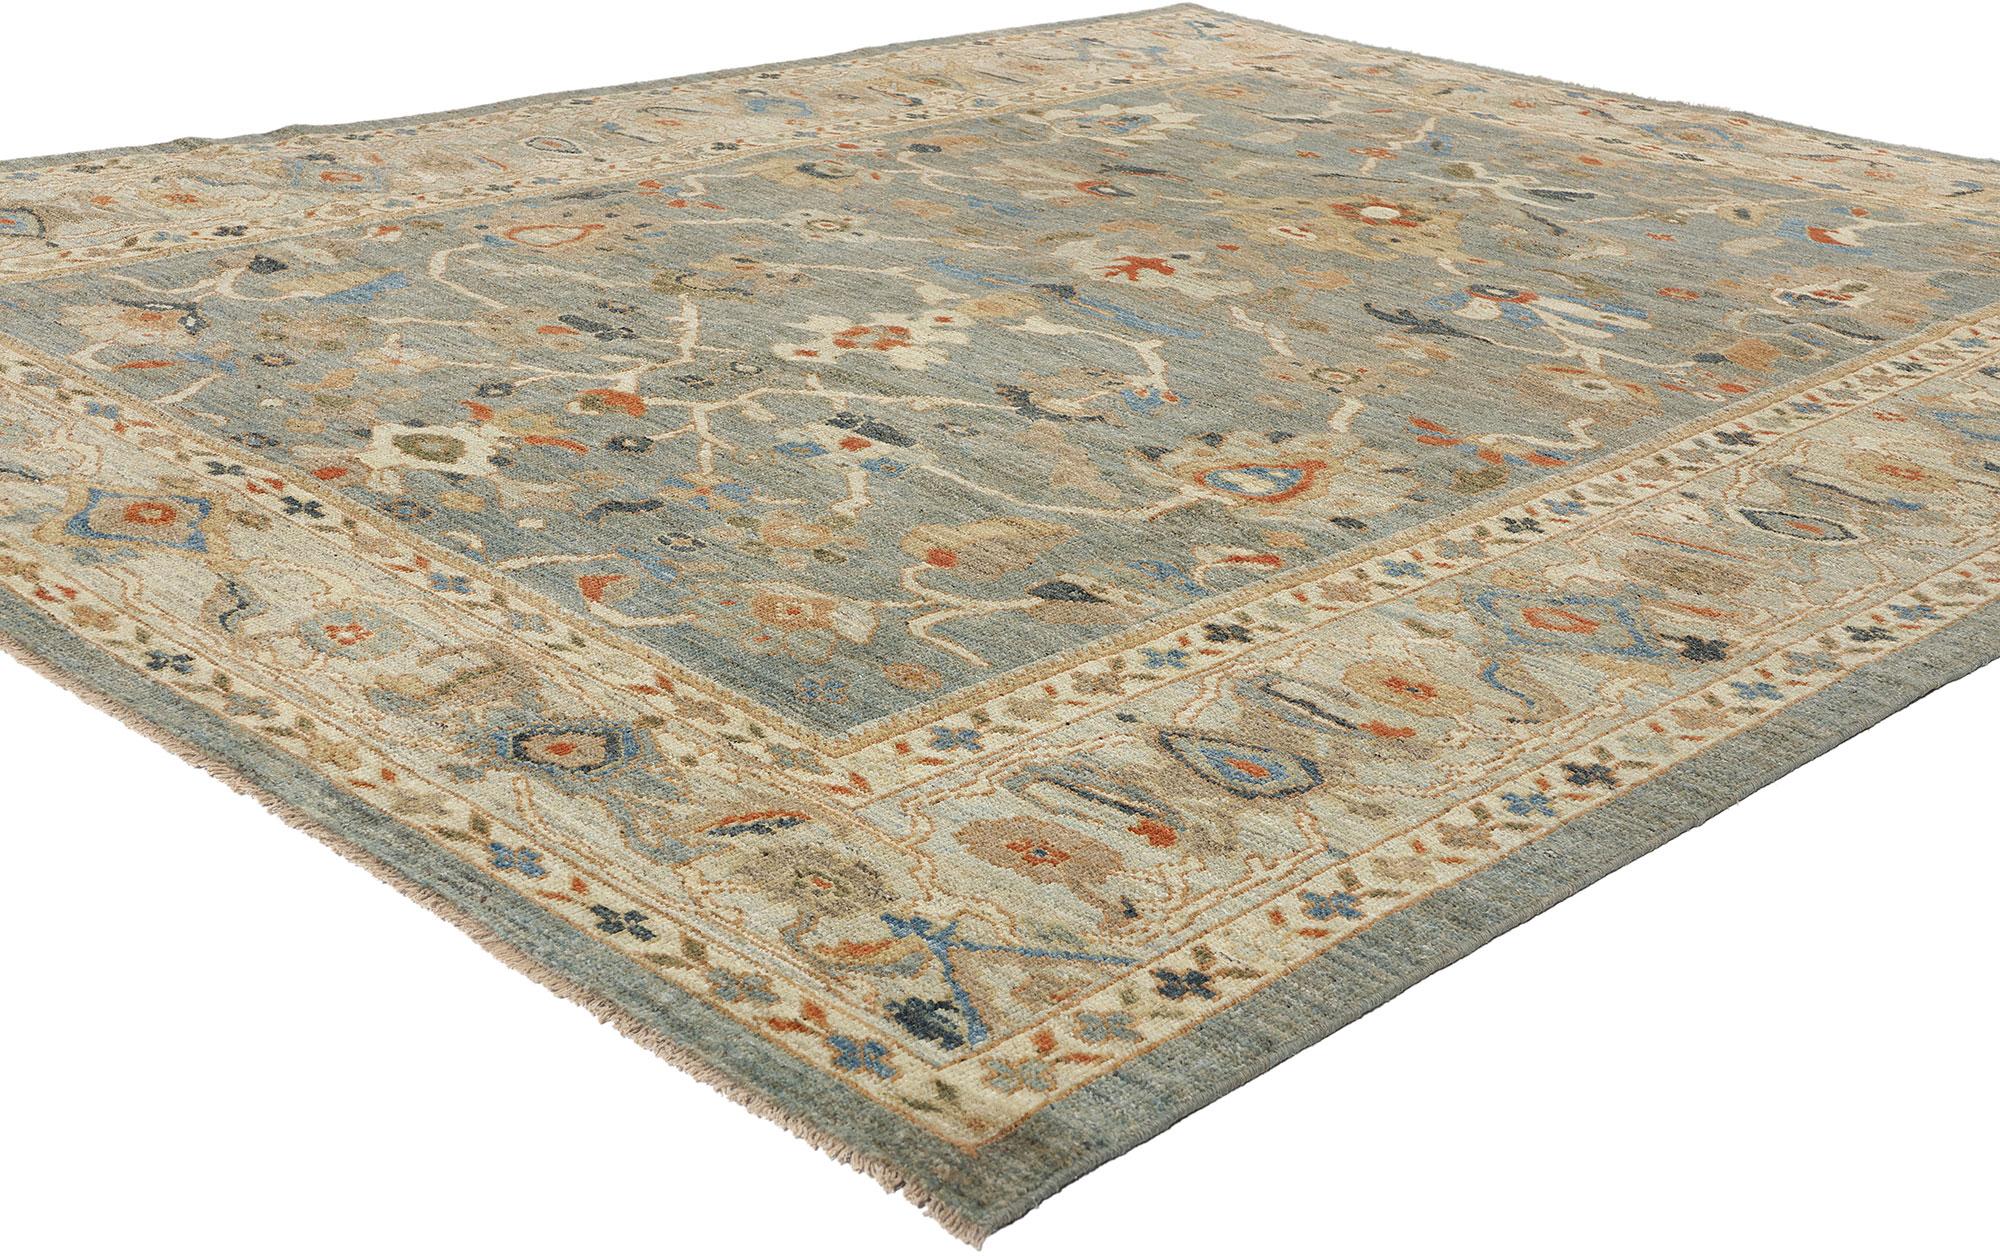 61288 Modern Blue Persian Sultanabad Rug, 08'02 x 10'01. Originating from Iran's Sultanabad region, Persian Sultanabad rugs are highly regarded for their exceptional craftsmanship, durable materials, and intricate designs. Created with meticulous